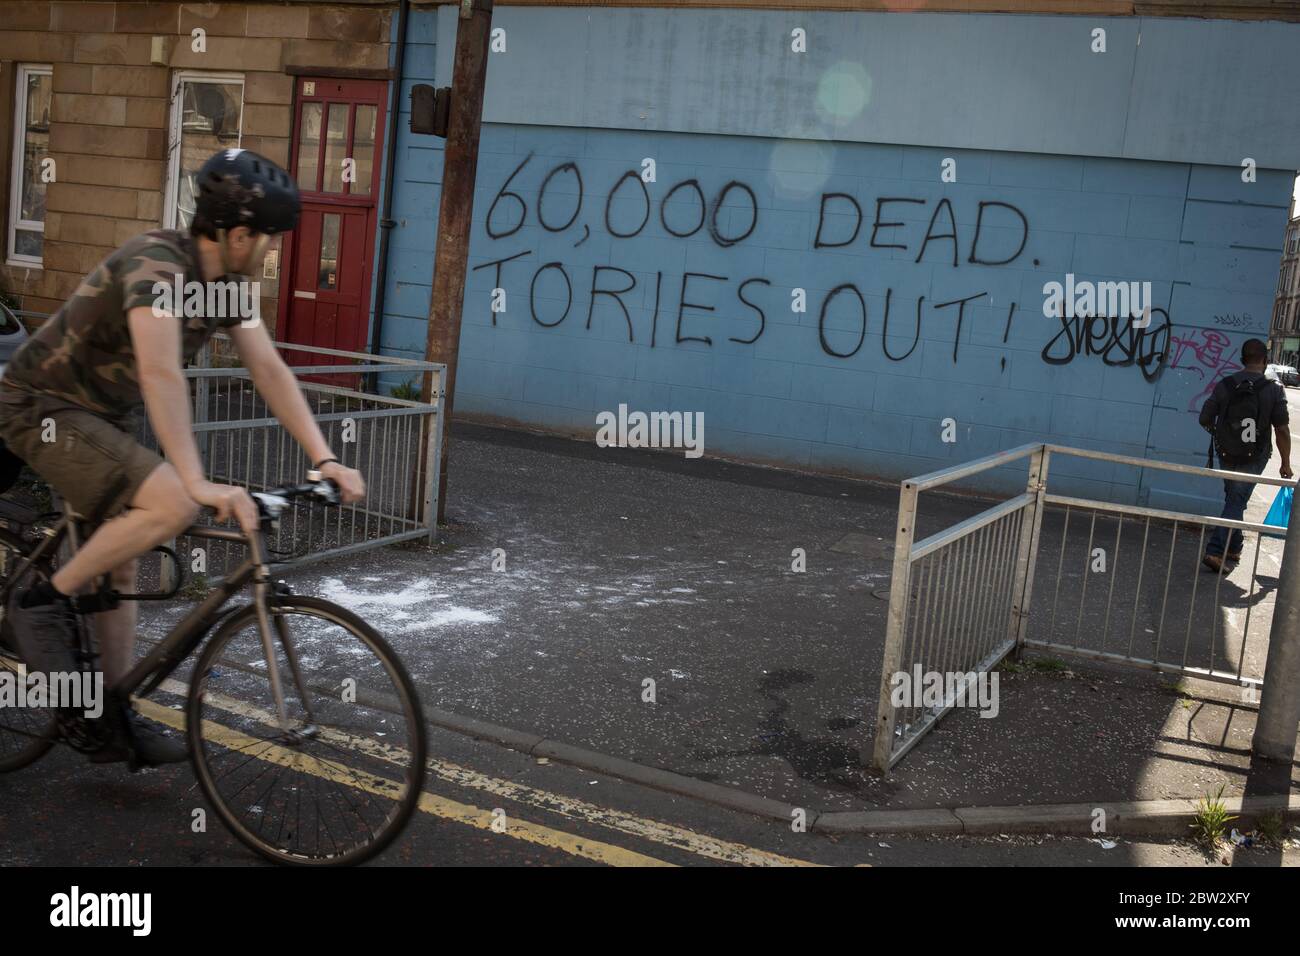 Glasgow, UK, 29th May 2020. Graffiti reading '60,000 Dead, Tories Out!'  has appeared on a wall in the Govanhill district of the city, displaying local anger at the policies and handling of the CoronaVirus Covid-19 health pandemic by the UK's Conservative government led by Prime Minister Boris Johnson. In Glasgow, Scotland, on 29 May 2020. Photo credit: Jeremy Sutton-Hibbert/Alamy Live News. Stock Photo